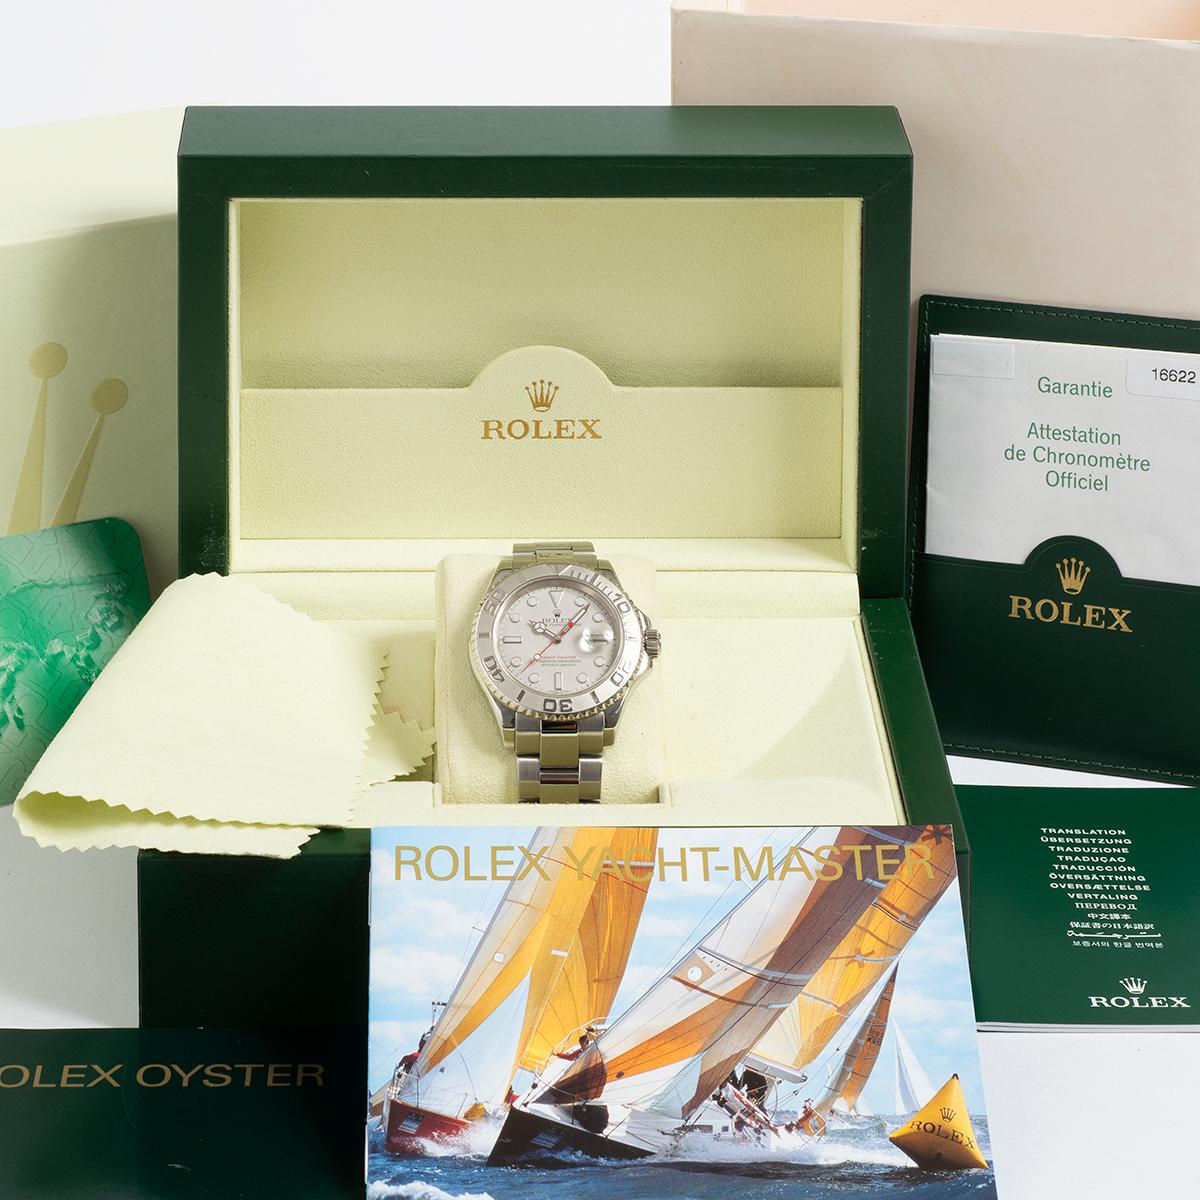 Our Rolex Yacht-Master 16622 40mm with stainless steel case and platinum bezel with platinum dust dial, is presented in outstanding condition with light signs of use from new. A complete set, our example comprises inner and outer box, card sleeve,